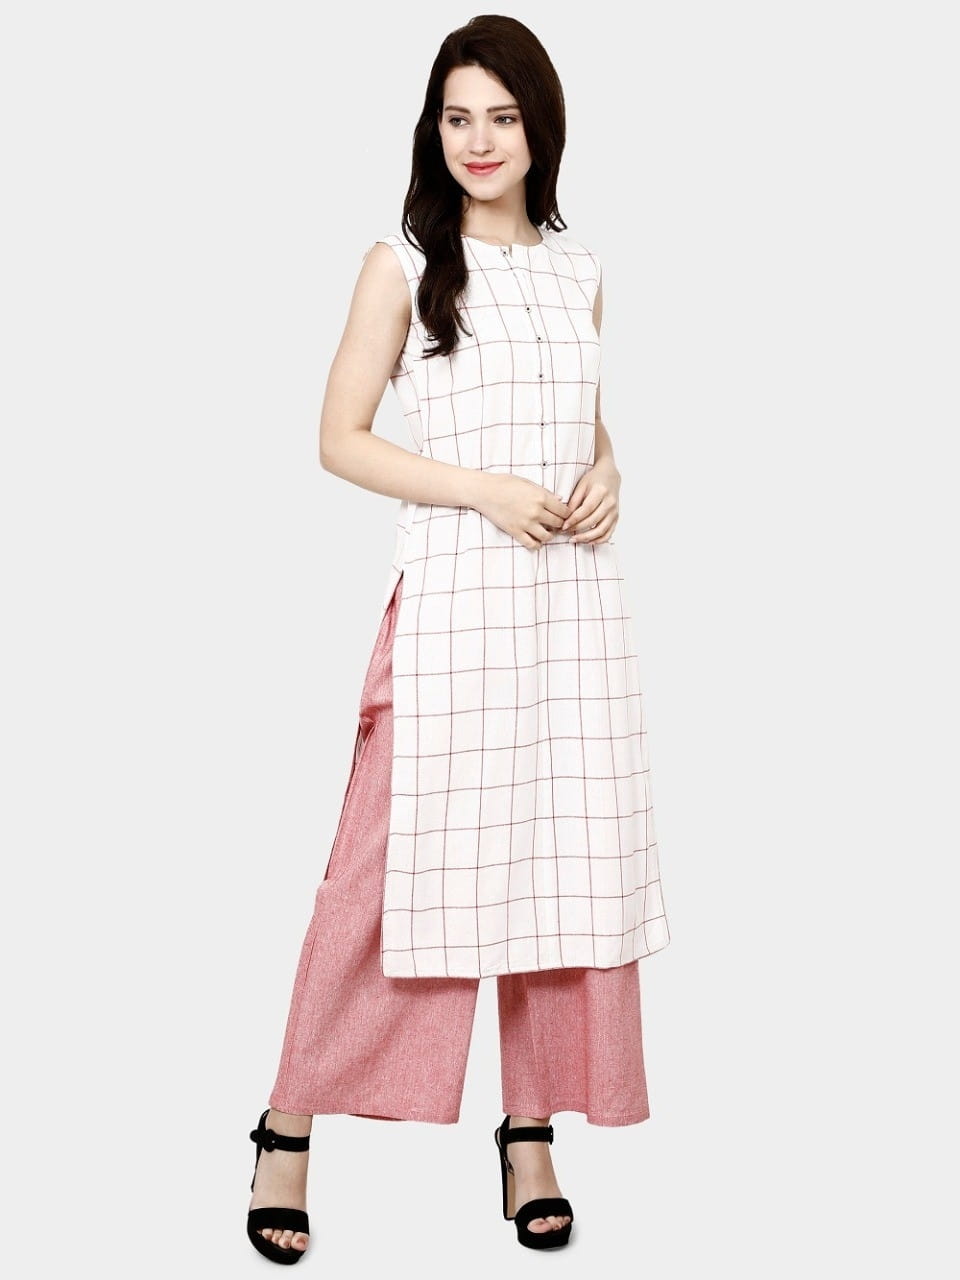 Buy SEEDS OF FUSION - Women's Kurti Made with Cotton Material, White Colour  (Small) at Amazon.in